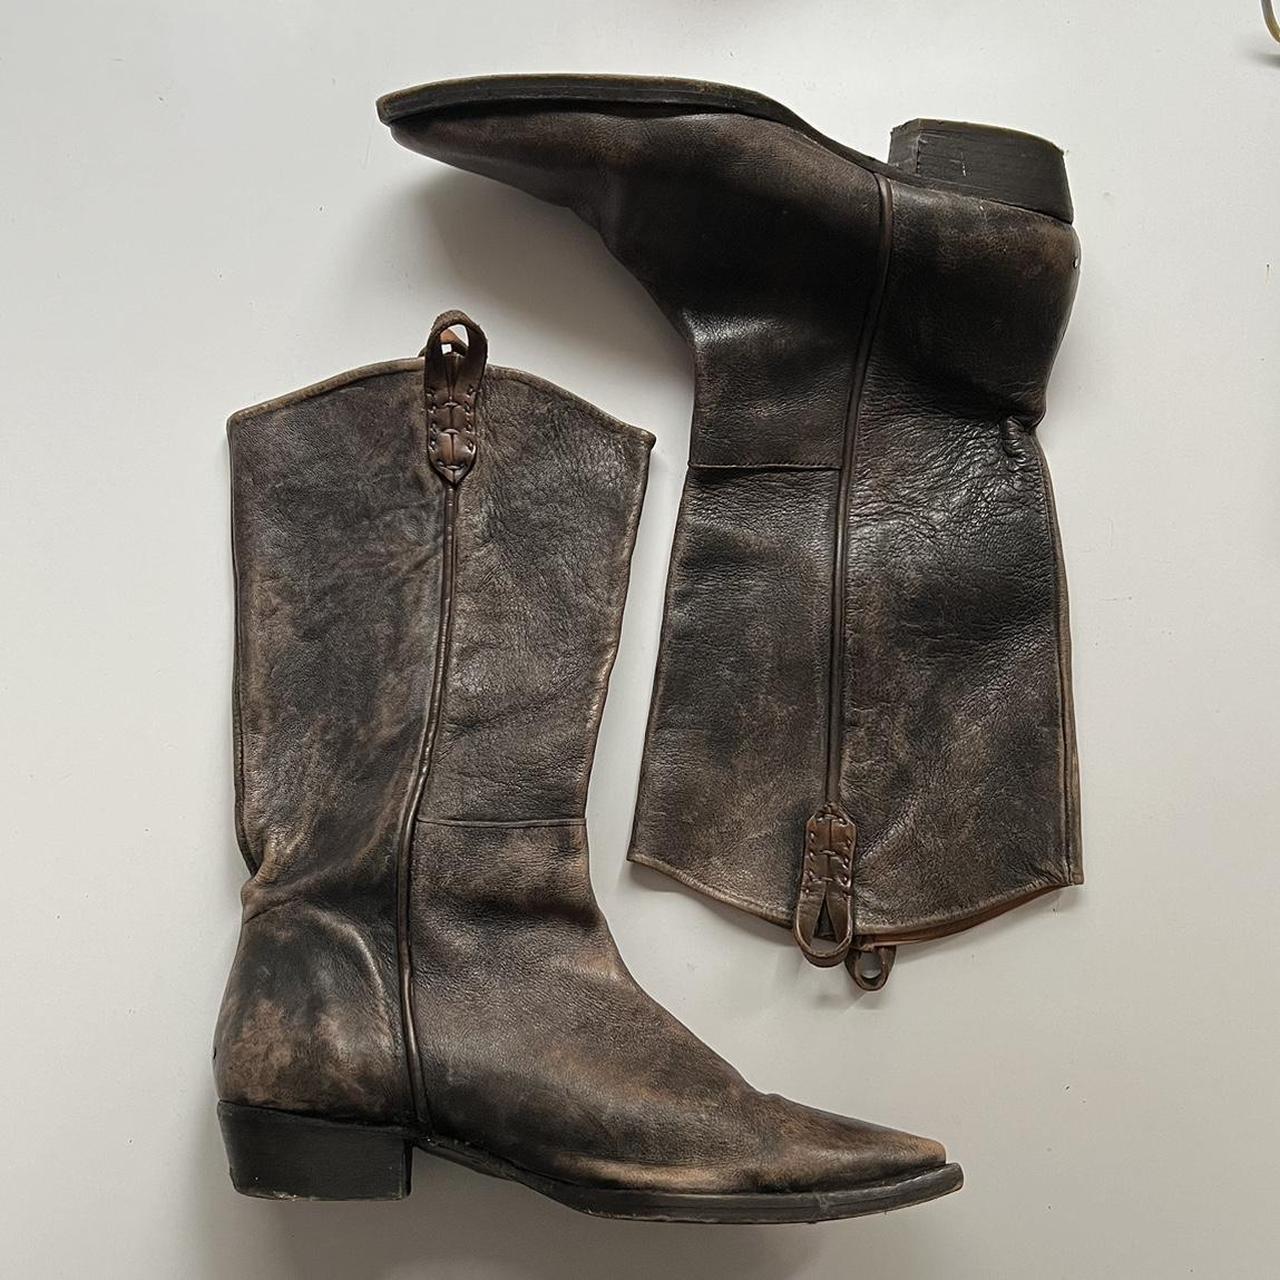 Incredible Free People Cowboy Boots Have been worn a - Depop